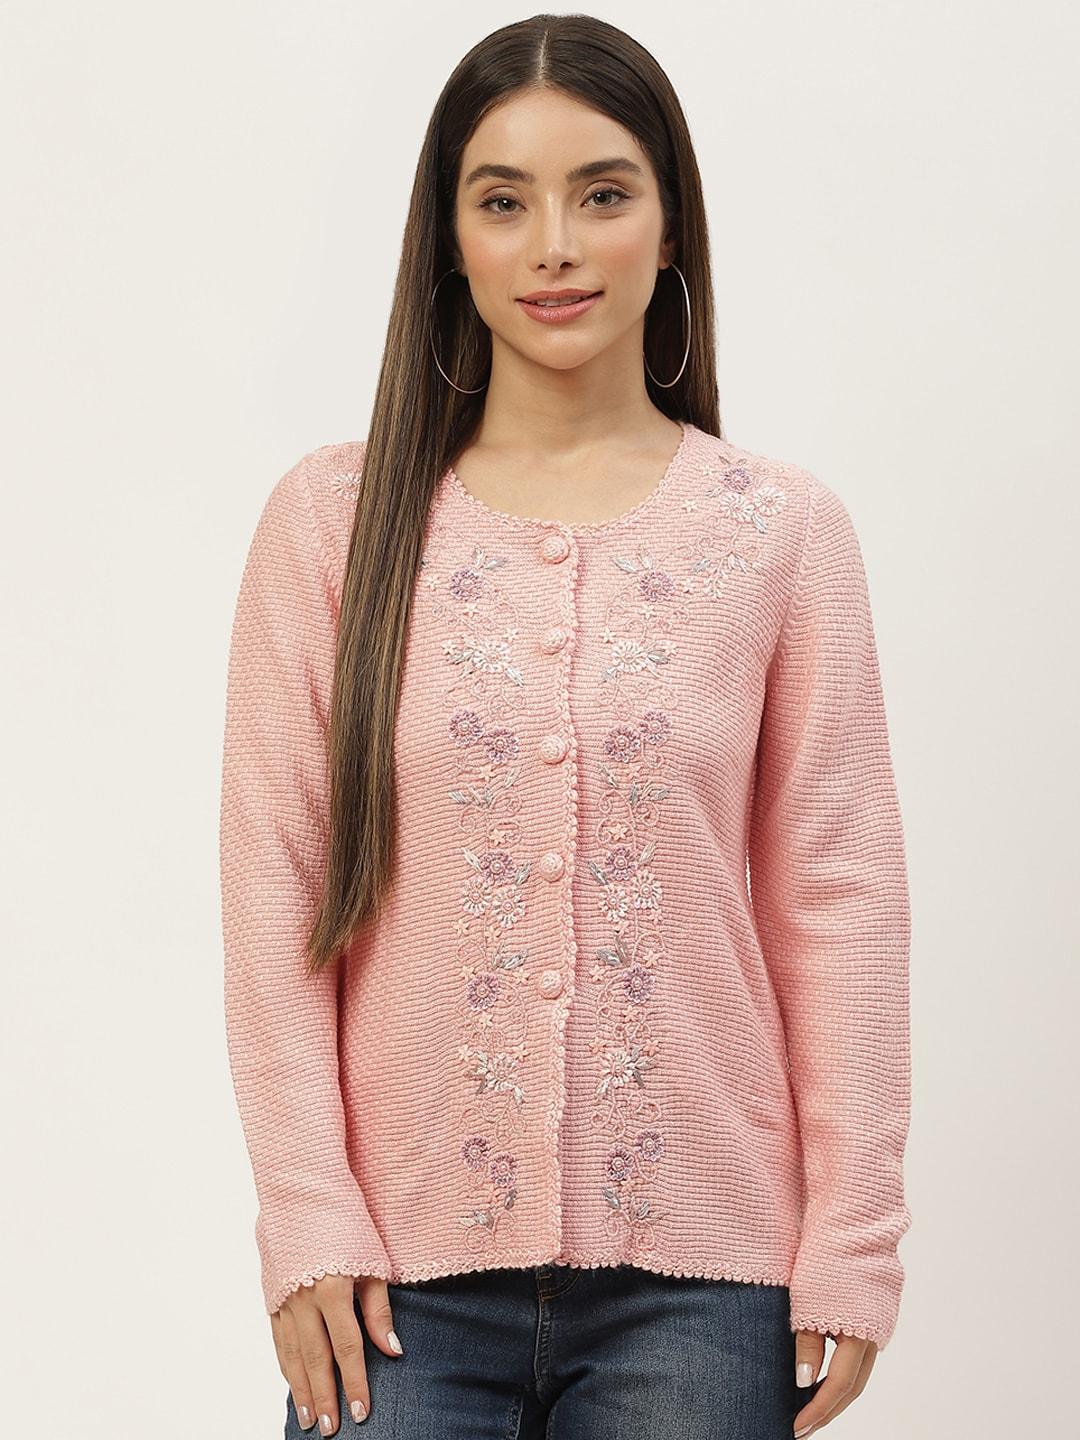 apsley-women-pink-&-silver-floral-cardigan-with-embroidered-detail